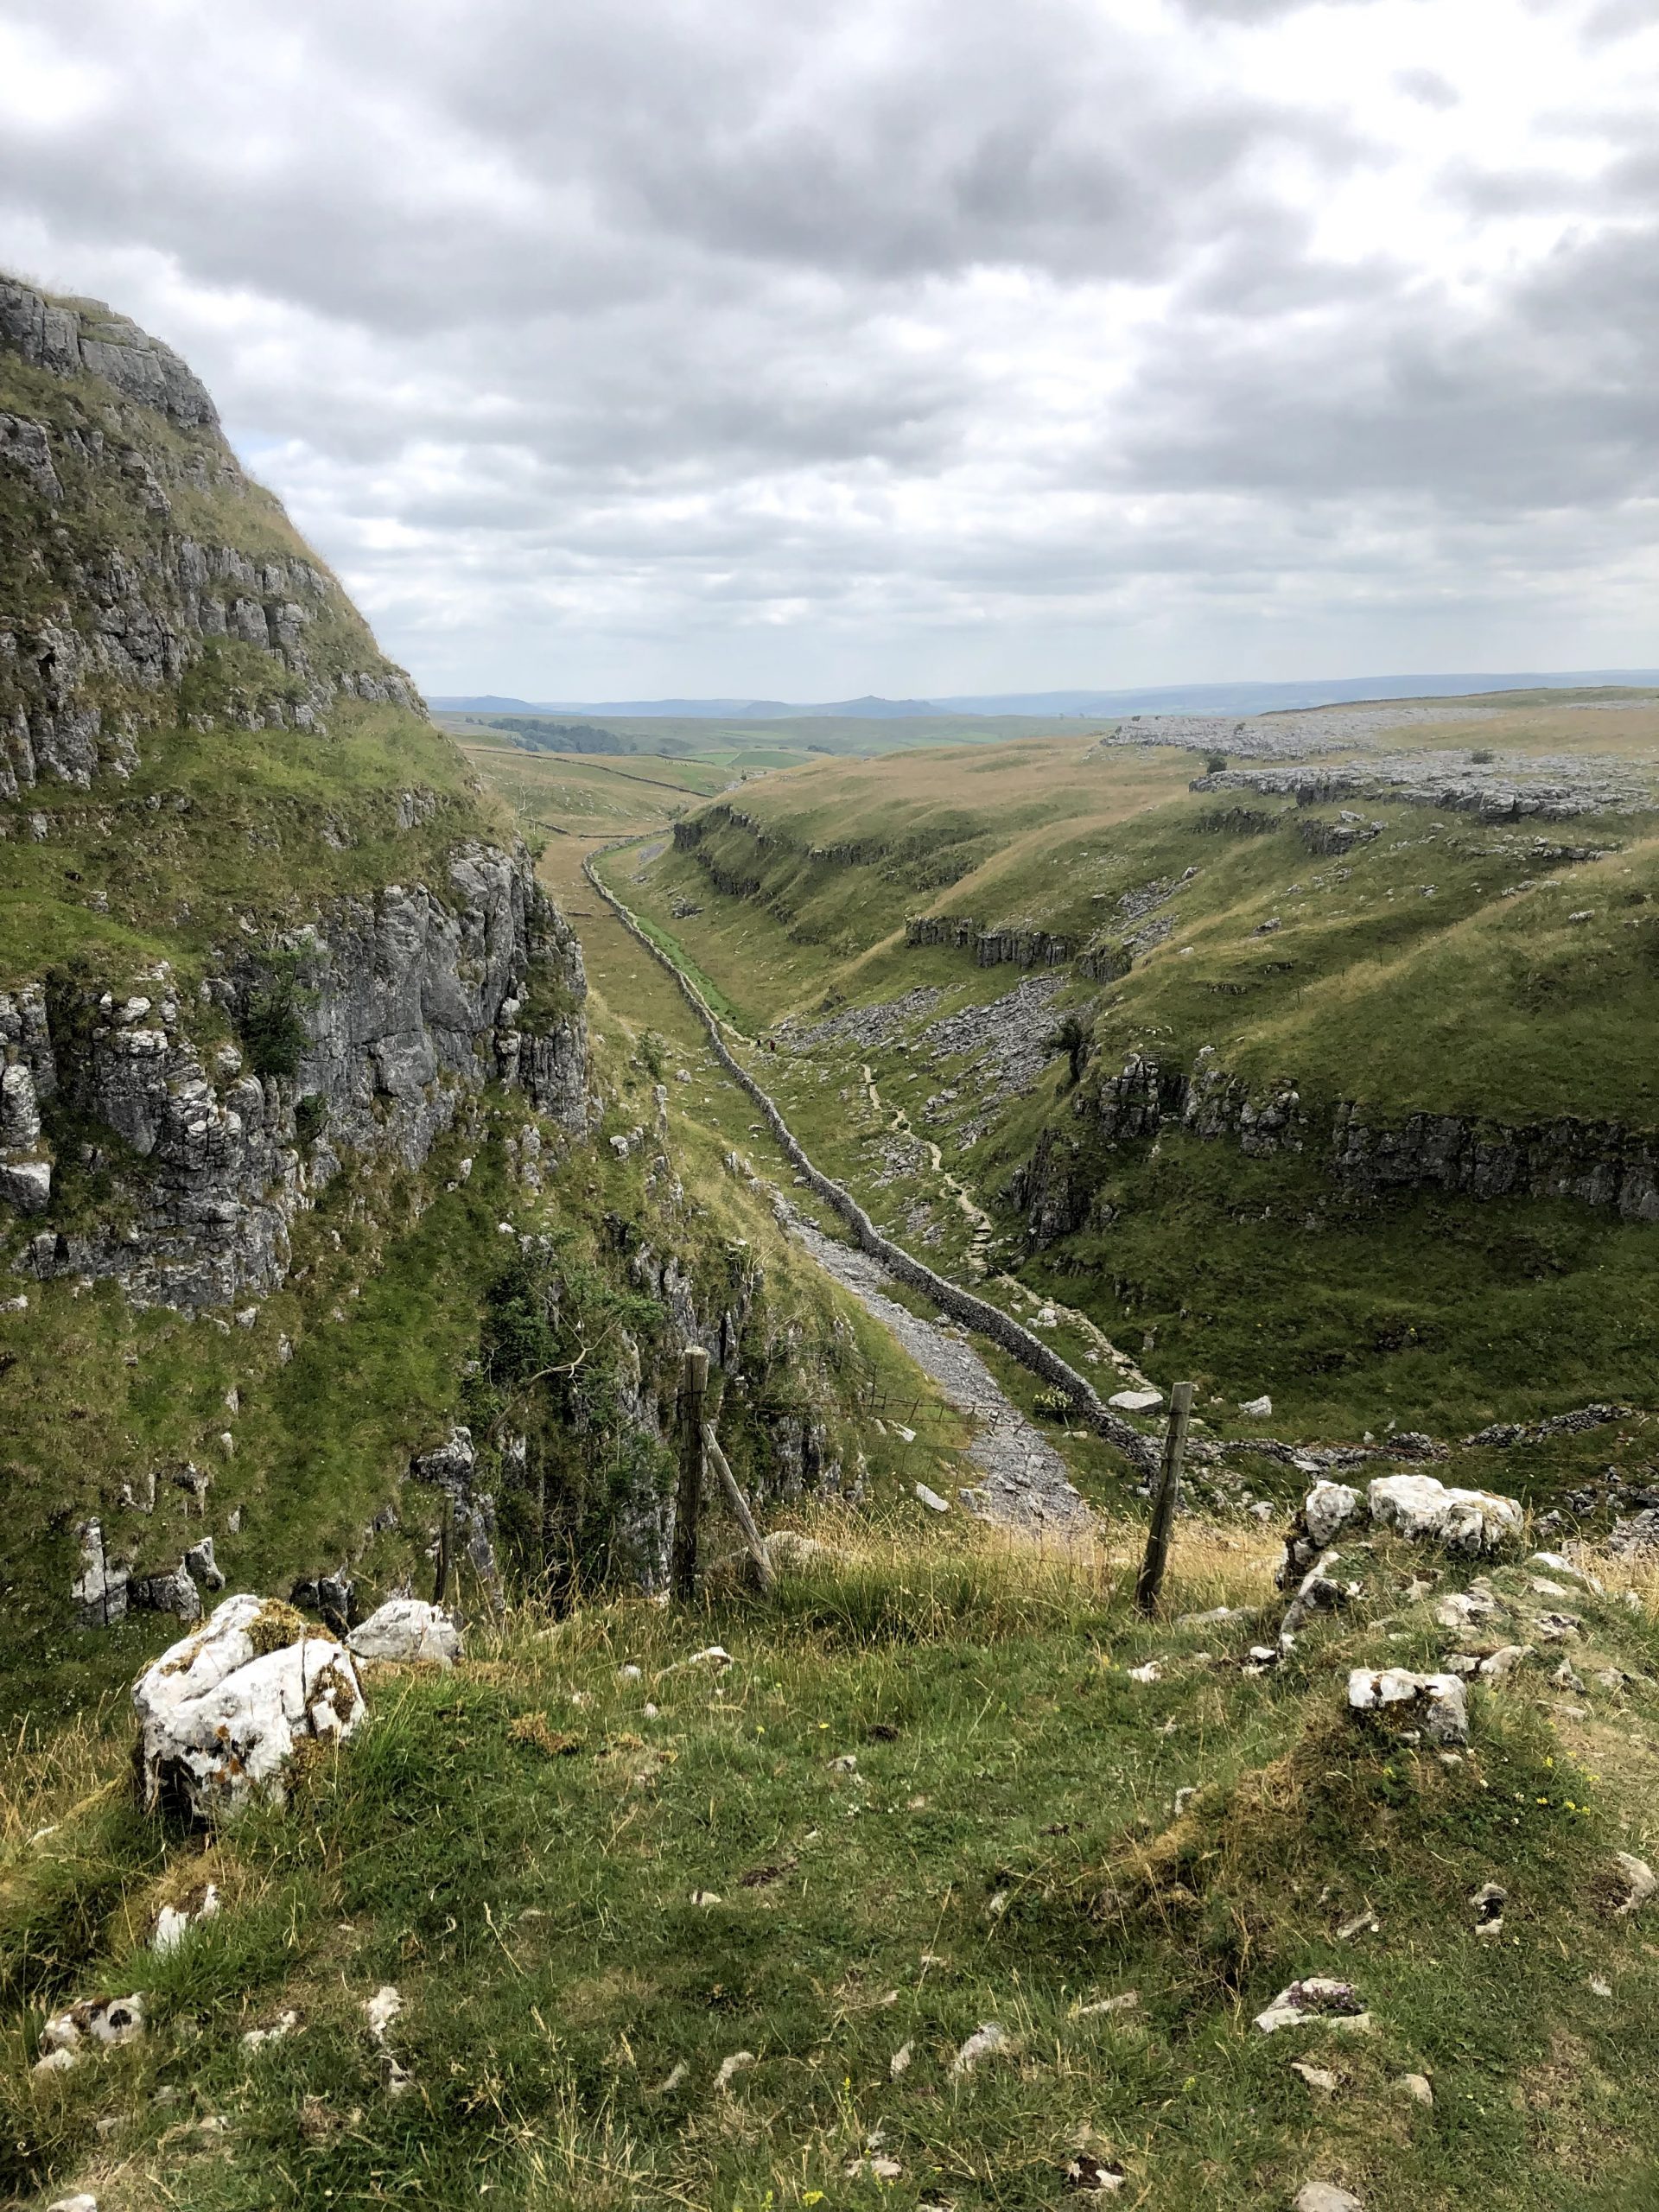 Beautiful Malham Cove trail with rocky crags and valley